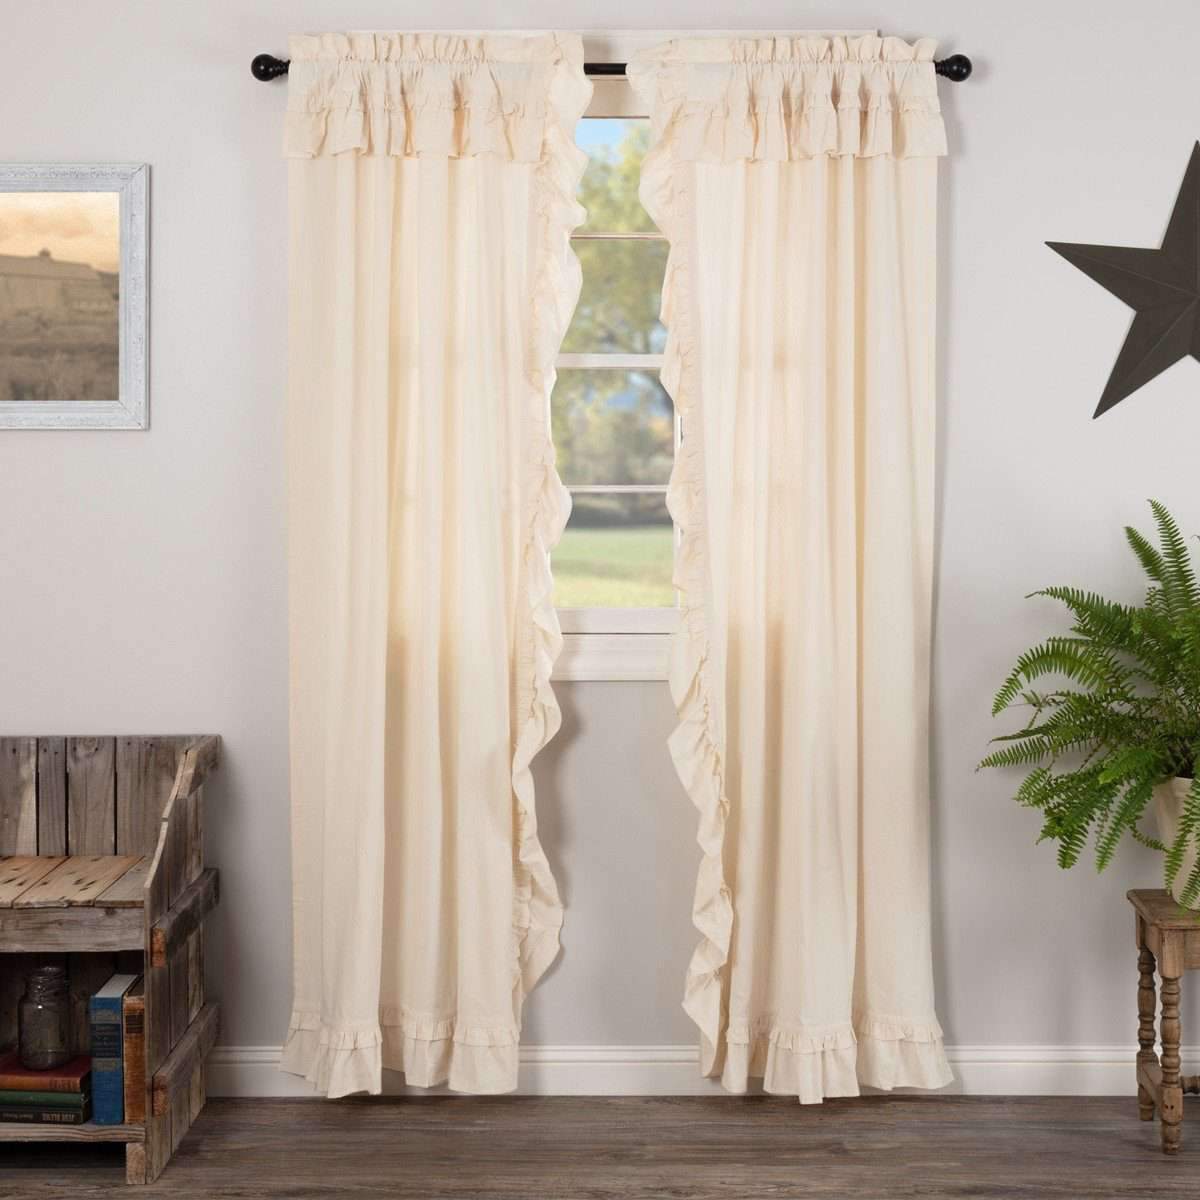 Muslin Ruffled Unbleached Natural Panel Curtain Set of 2 84"x40" VHC Brands - The Fox Decor